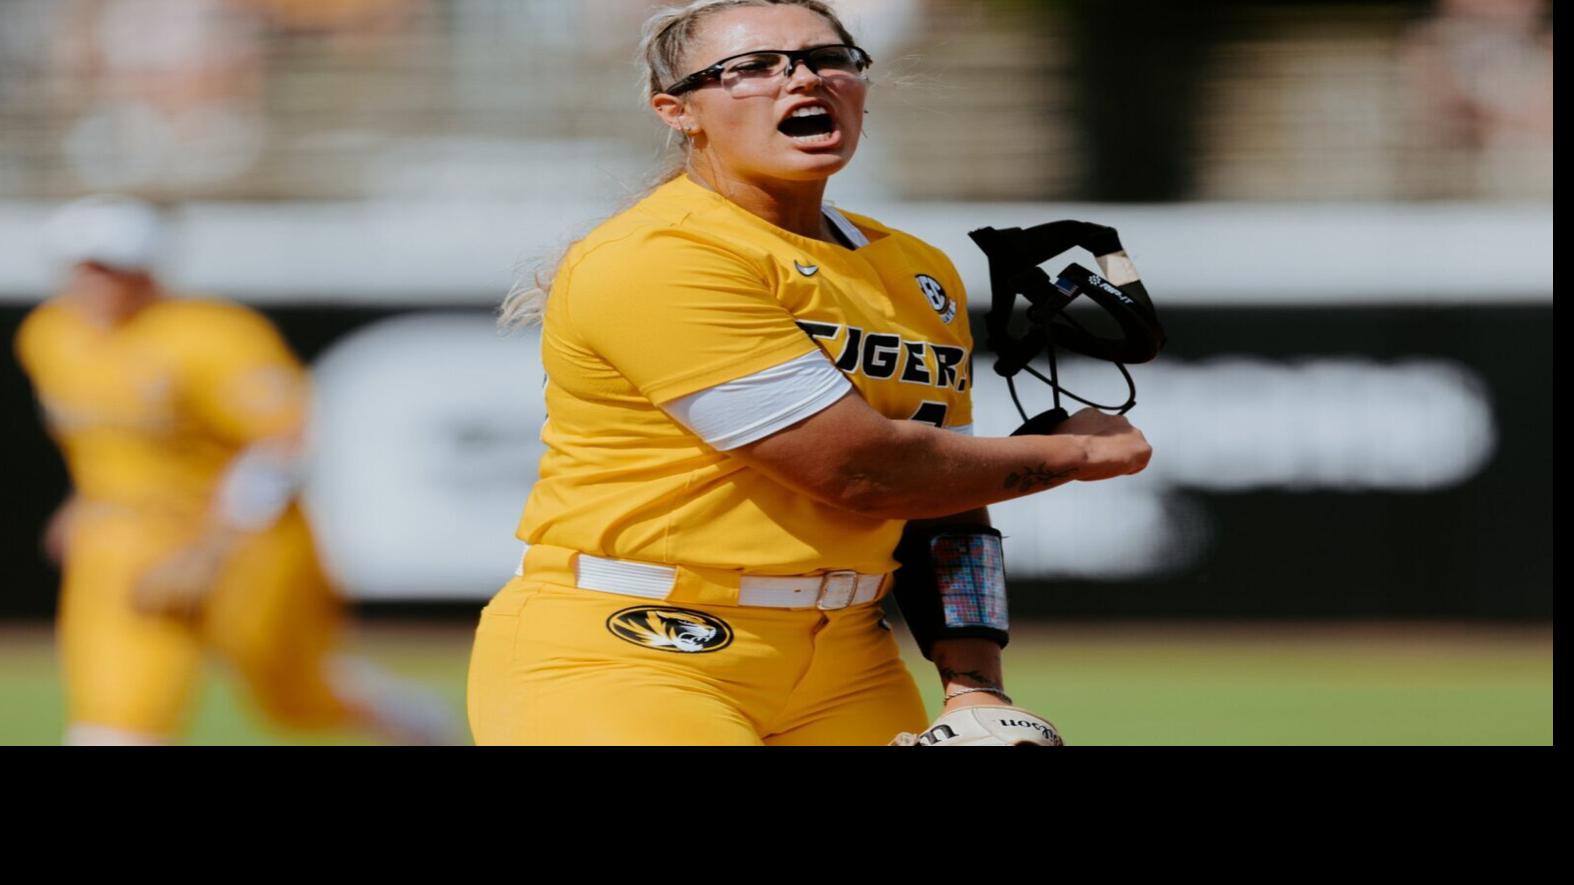 How Mizzou softball pitcher Laurin Krings threw 364 pitches, started 4 games in 2 days